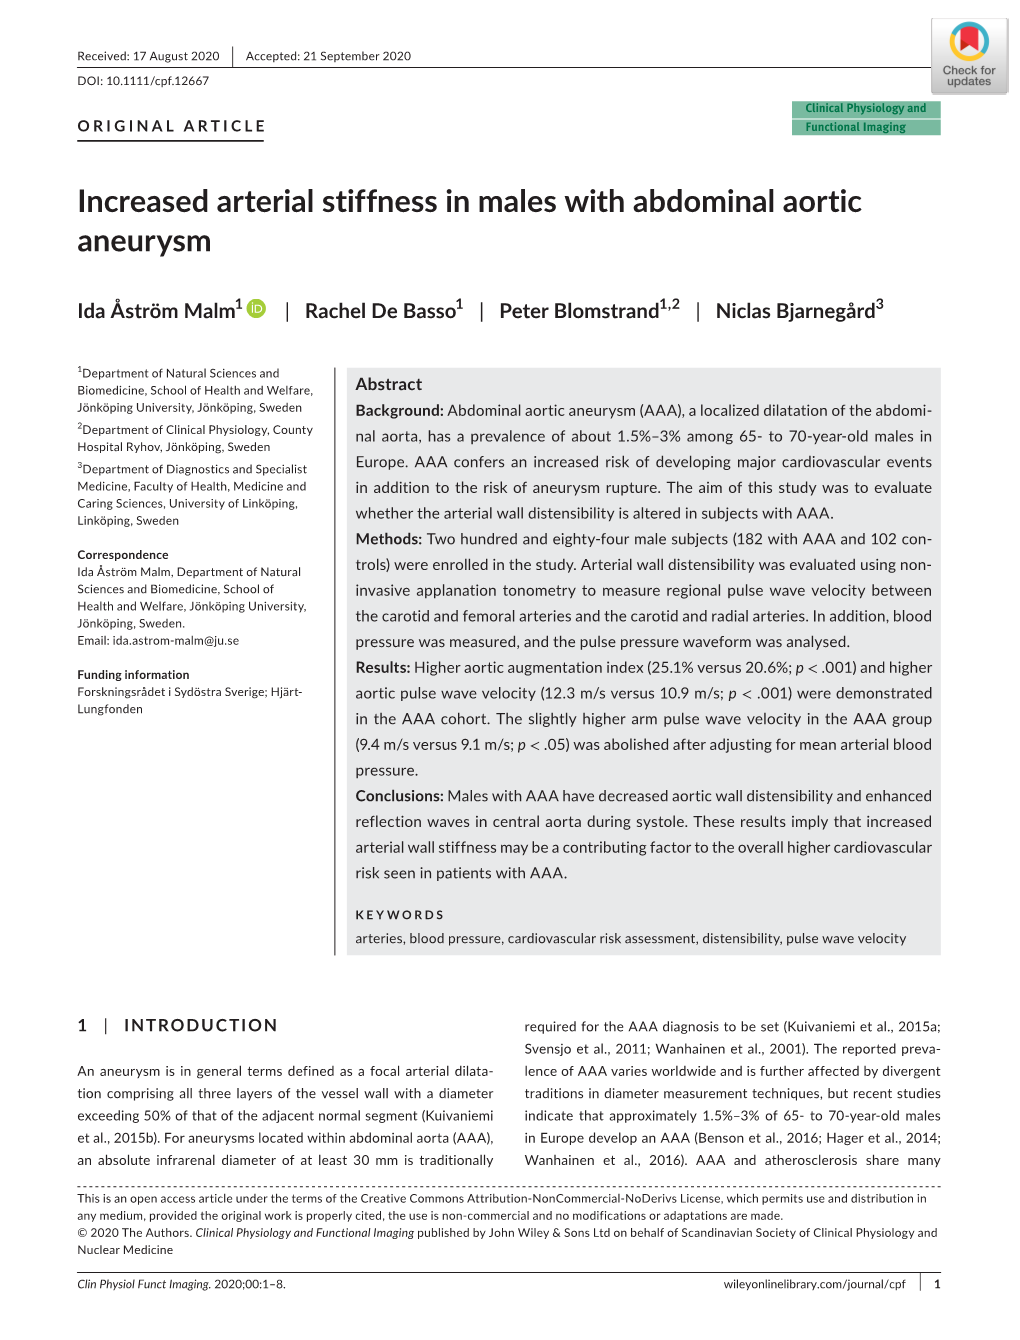 Increased Arterial Stiffness in Males with Abdominal Aortic Aneurysm